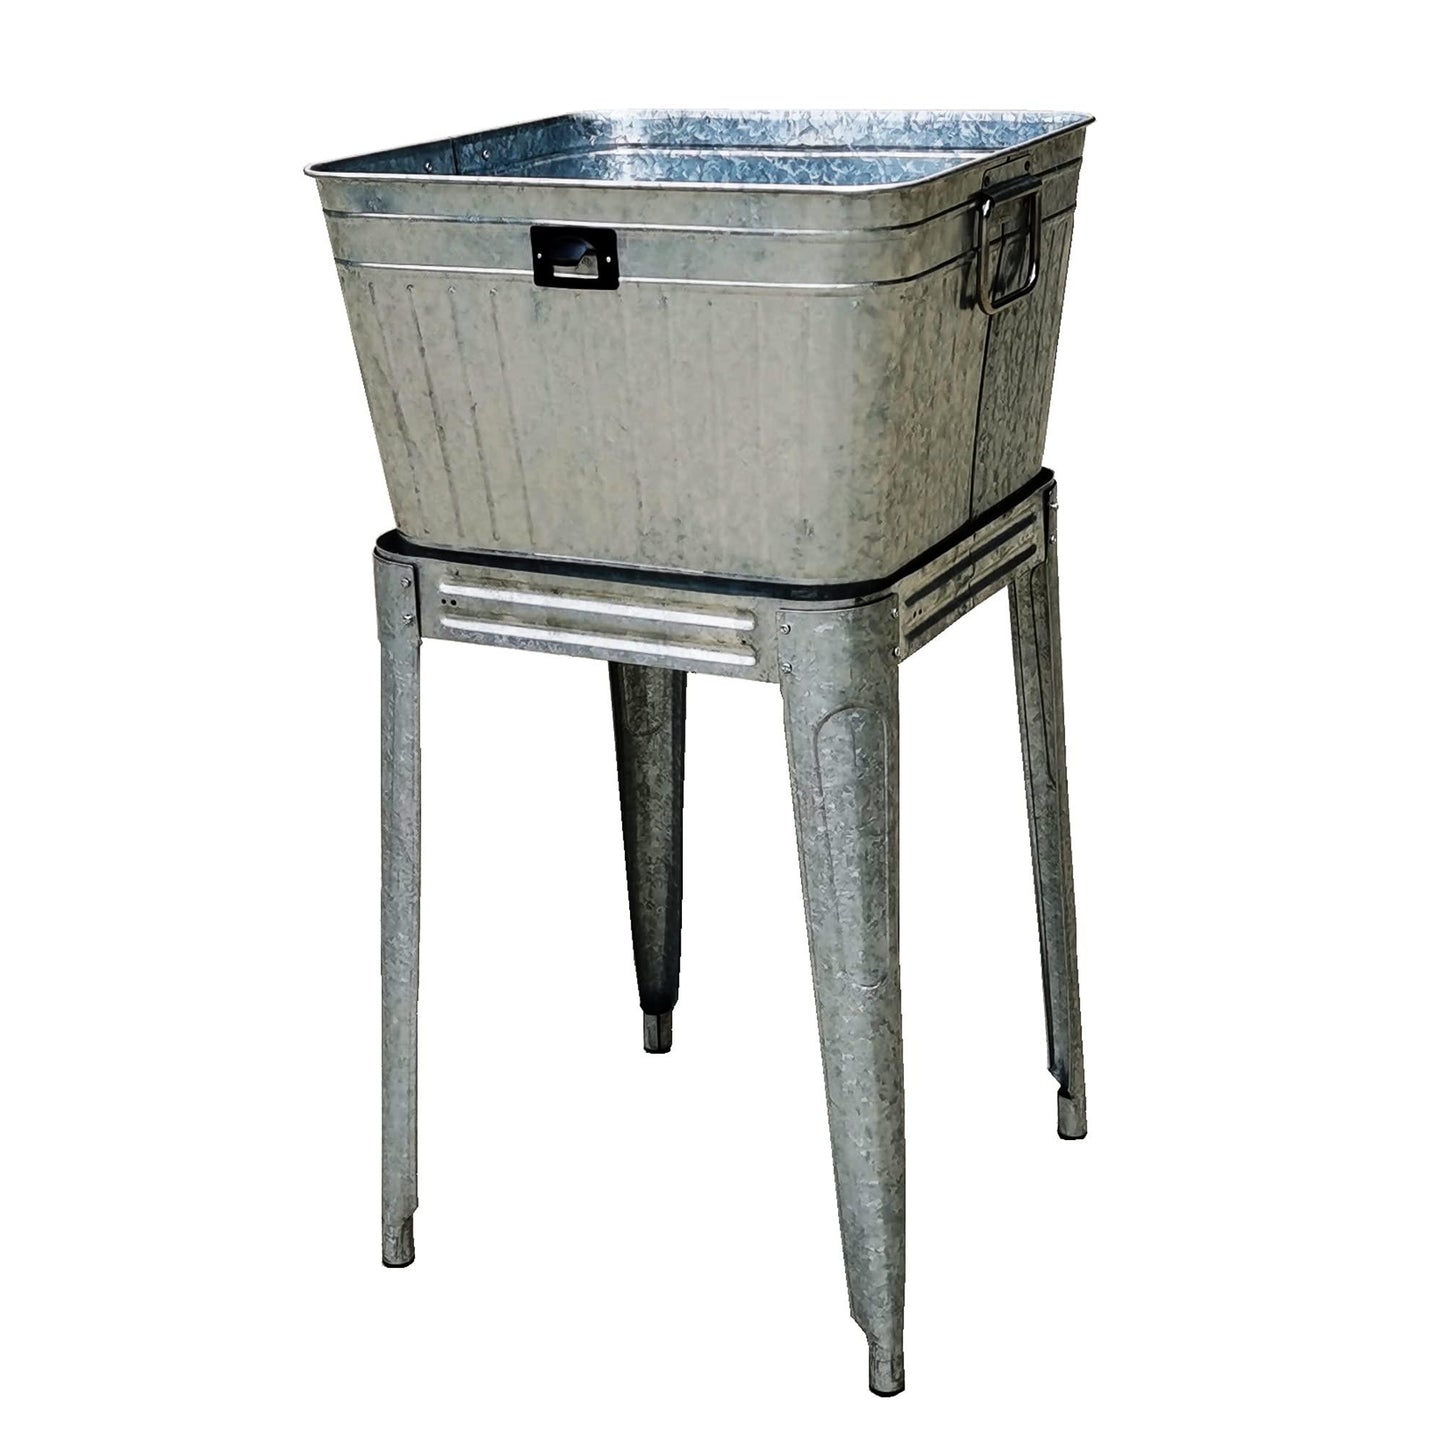 Metal Beverage Tub Cooler with Stand, Planter, Washbin - Rustic Grey - Backyard Expressions - CookCave